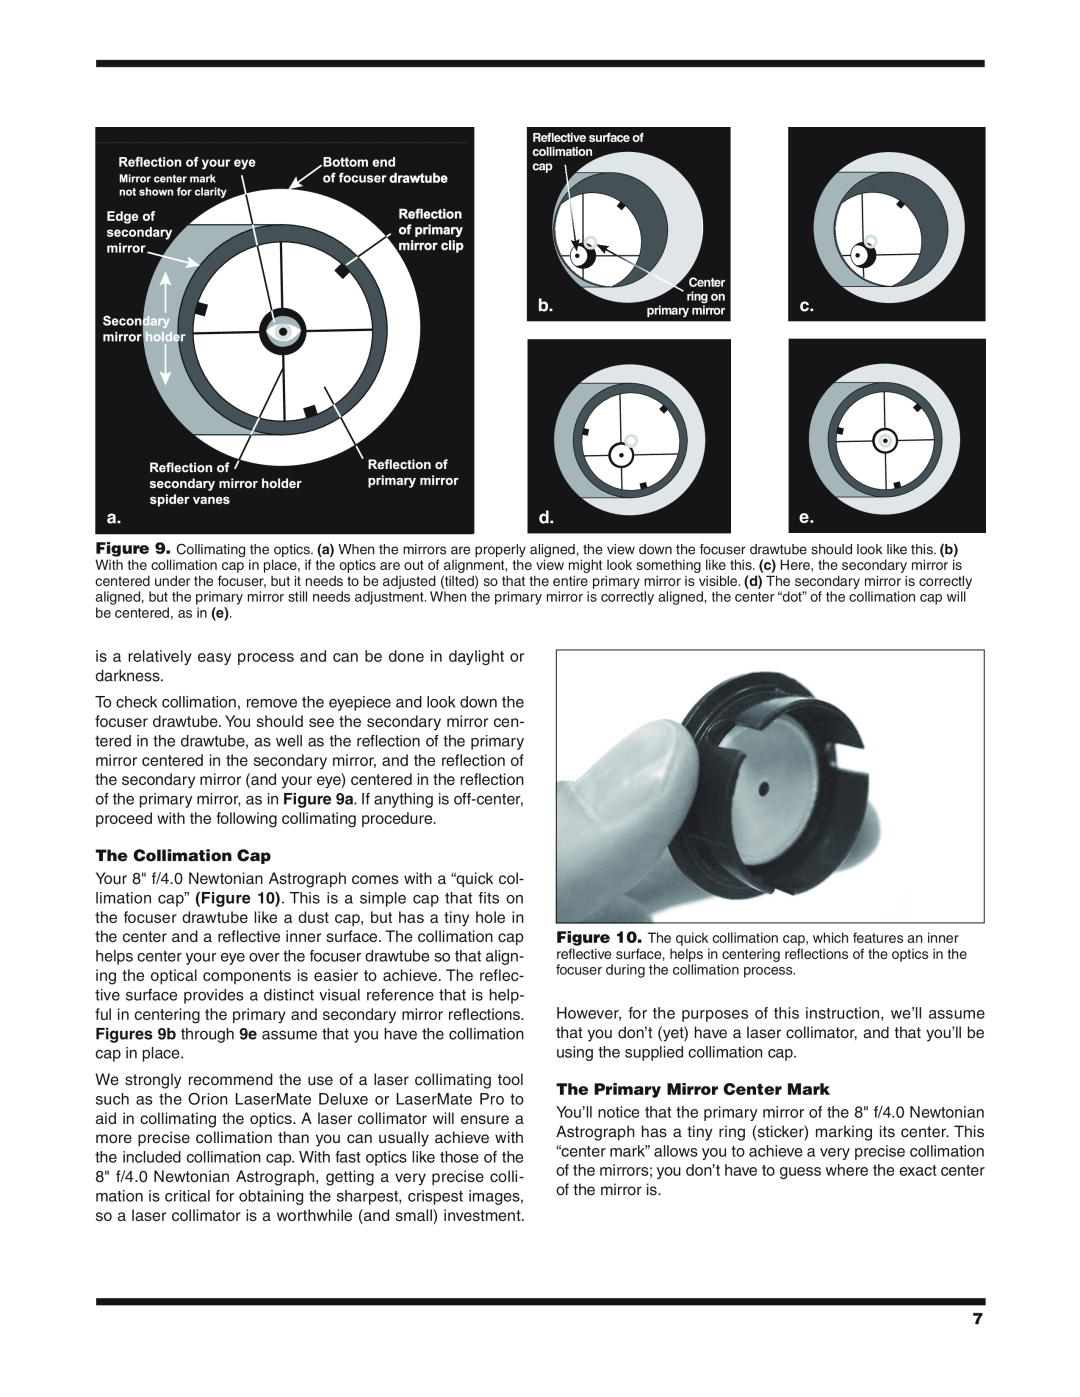 Orion 9527 instruction manual The Collimation Cap, The Primary Mirror Center Mark 